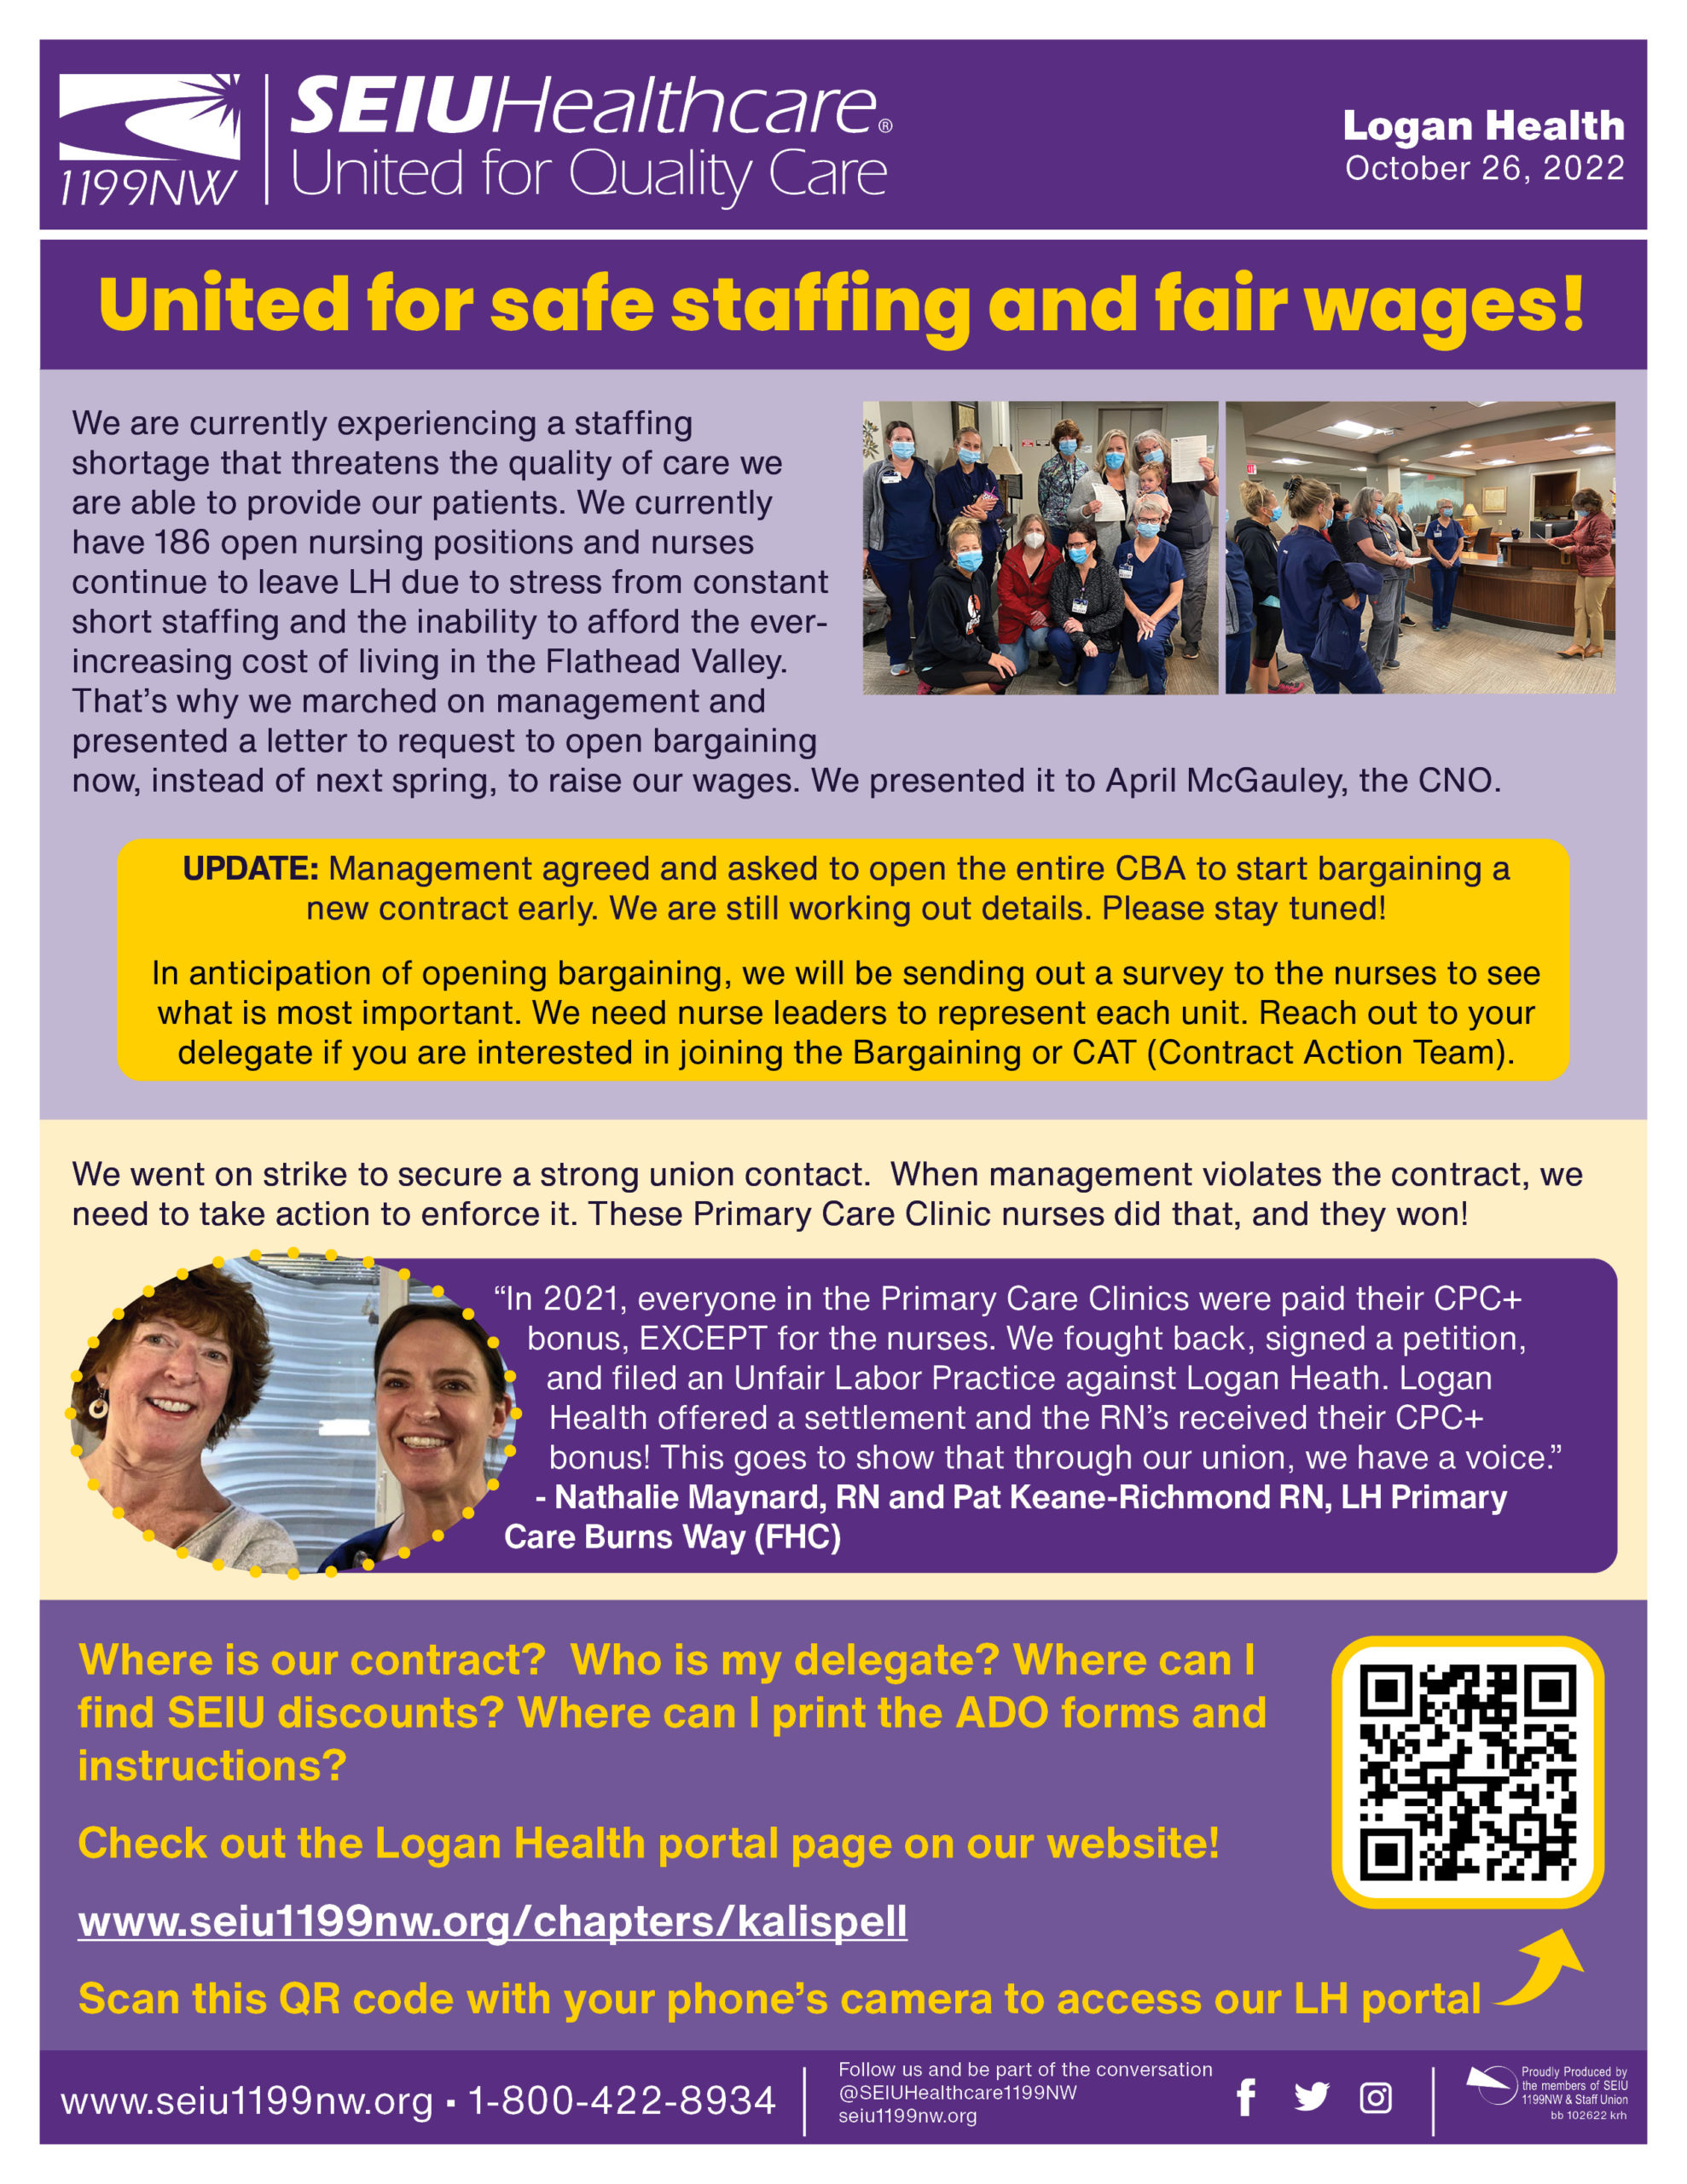 United for safe staffing and fair wages!